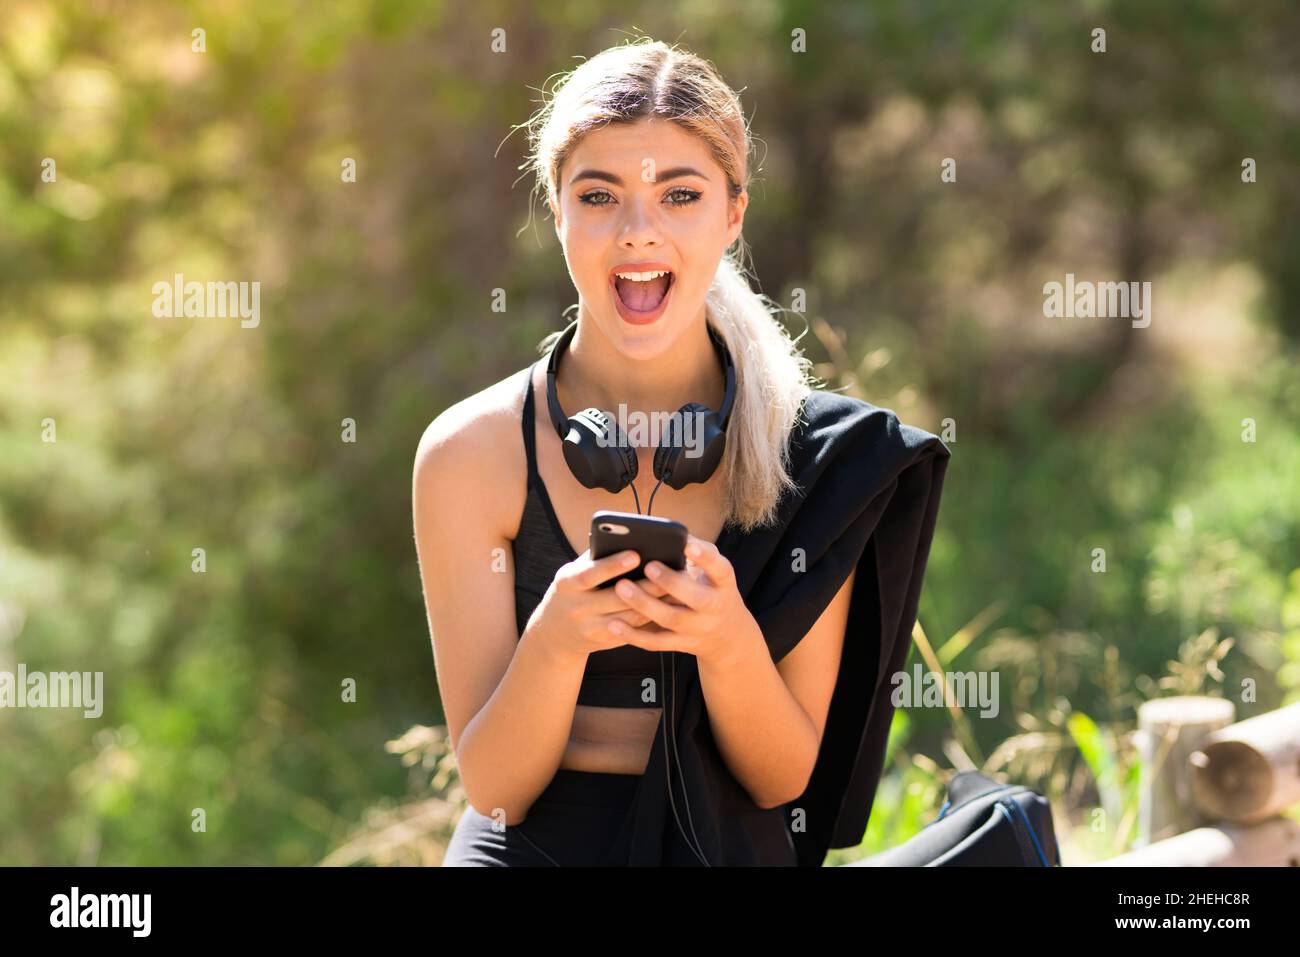 Teenager sport girl doing sport at outdoors surprised and sending a message Stock Photo